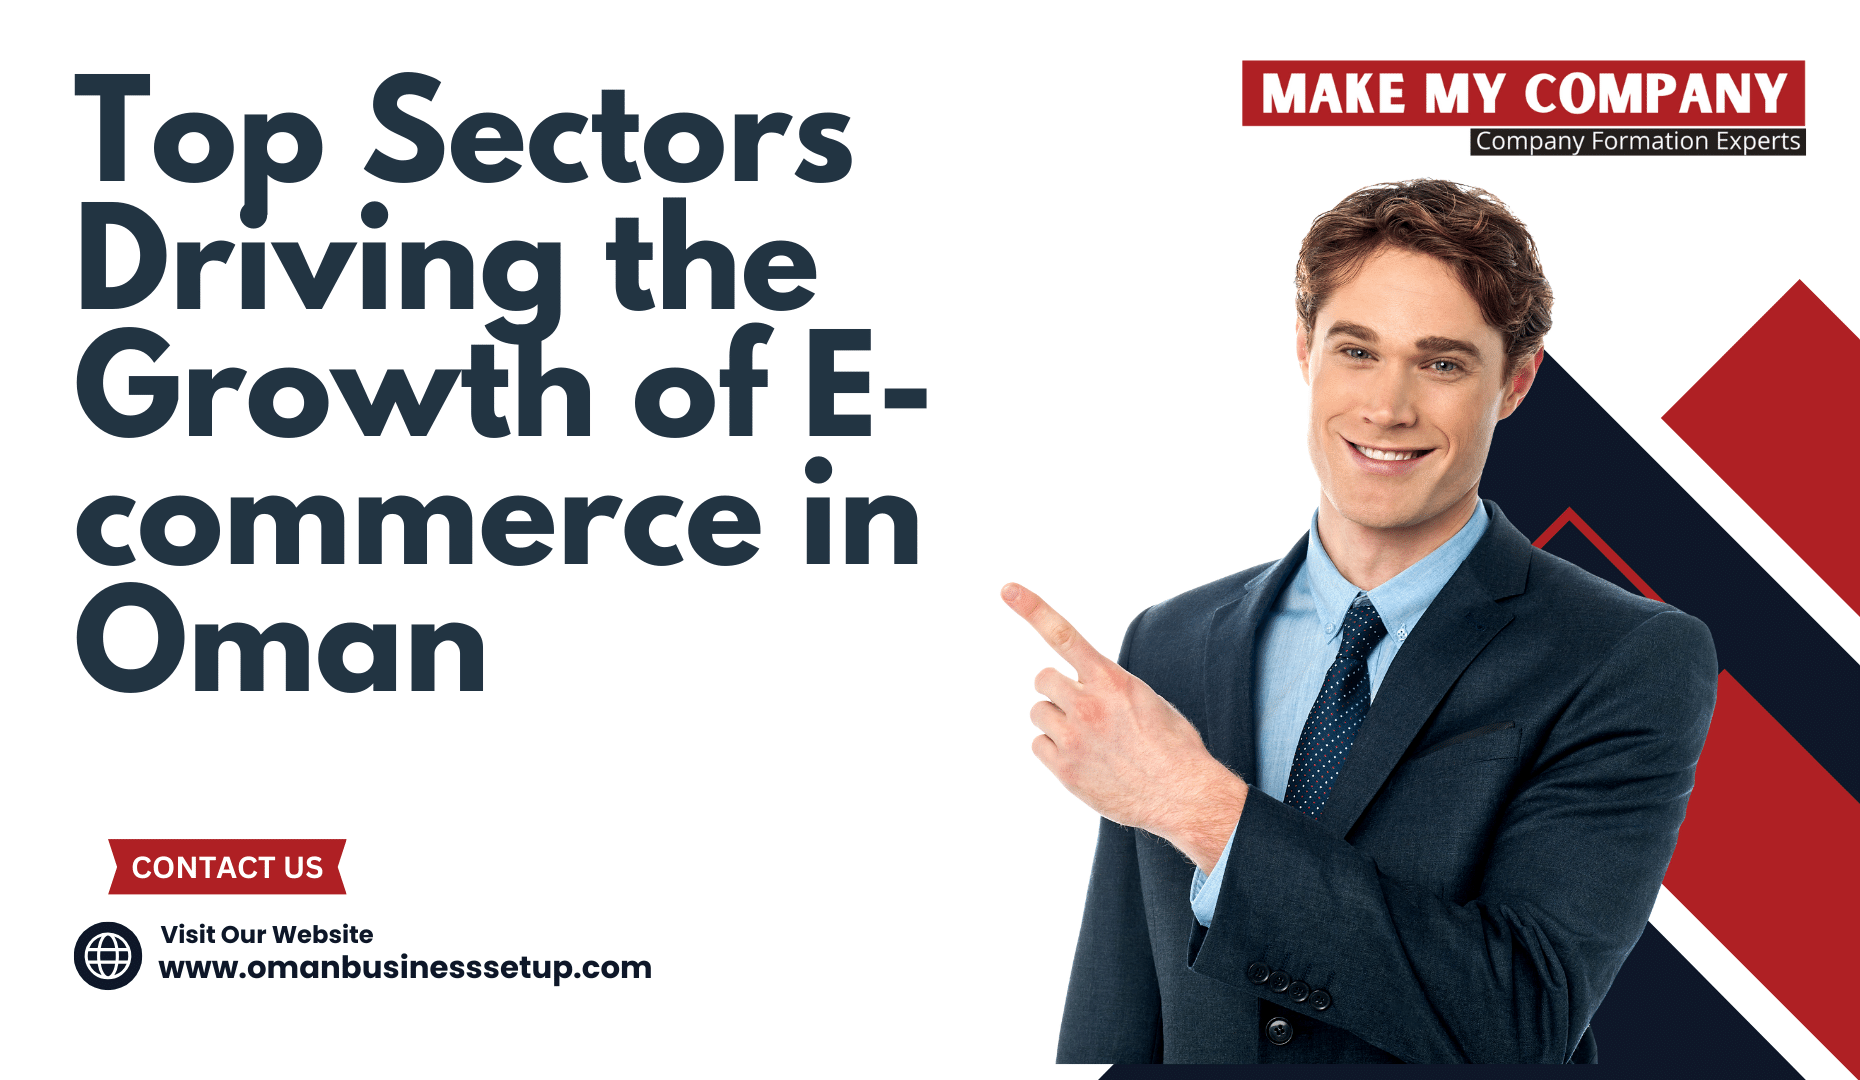 Top Sectors Driving the Growth of E-commerce in Oman